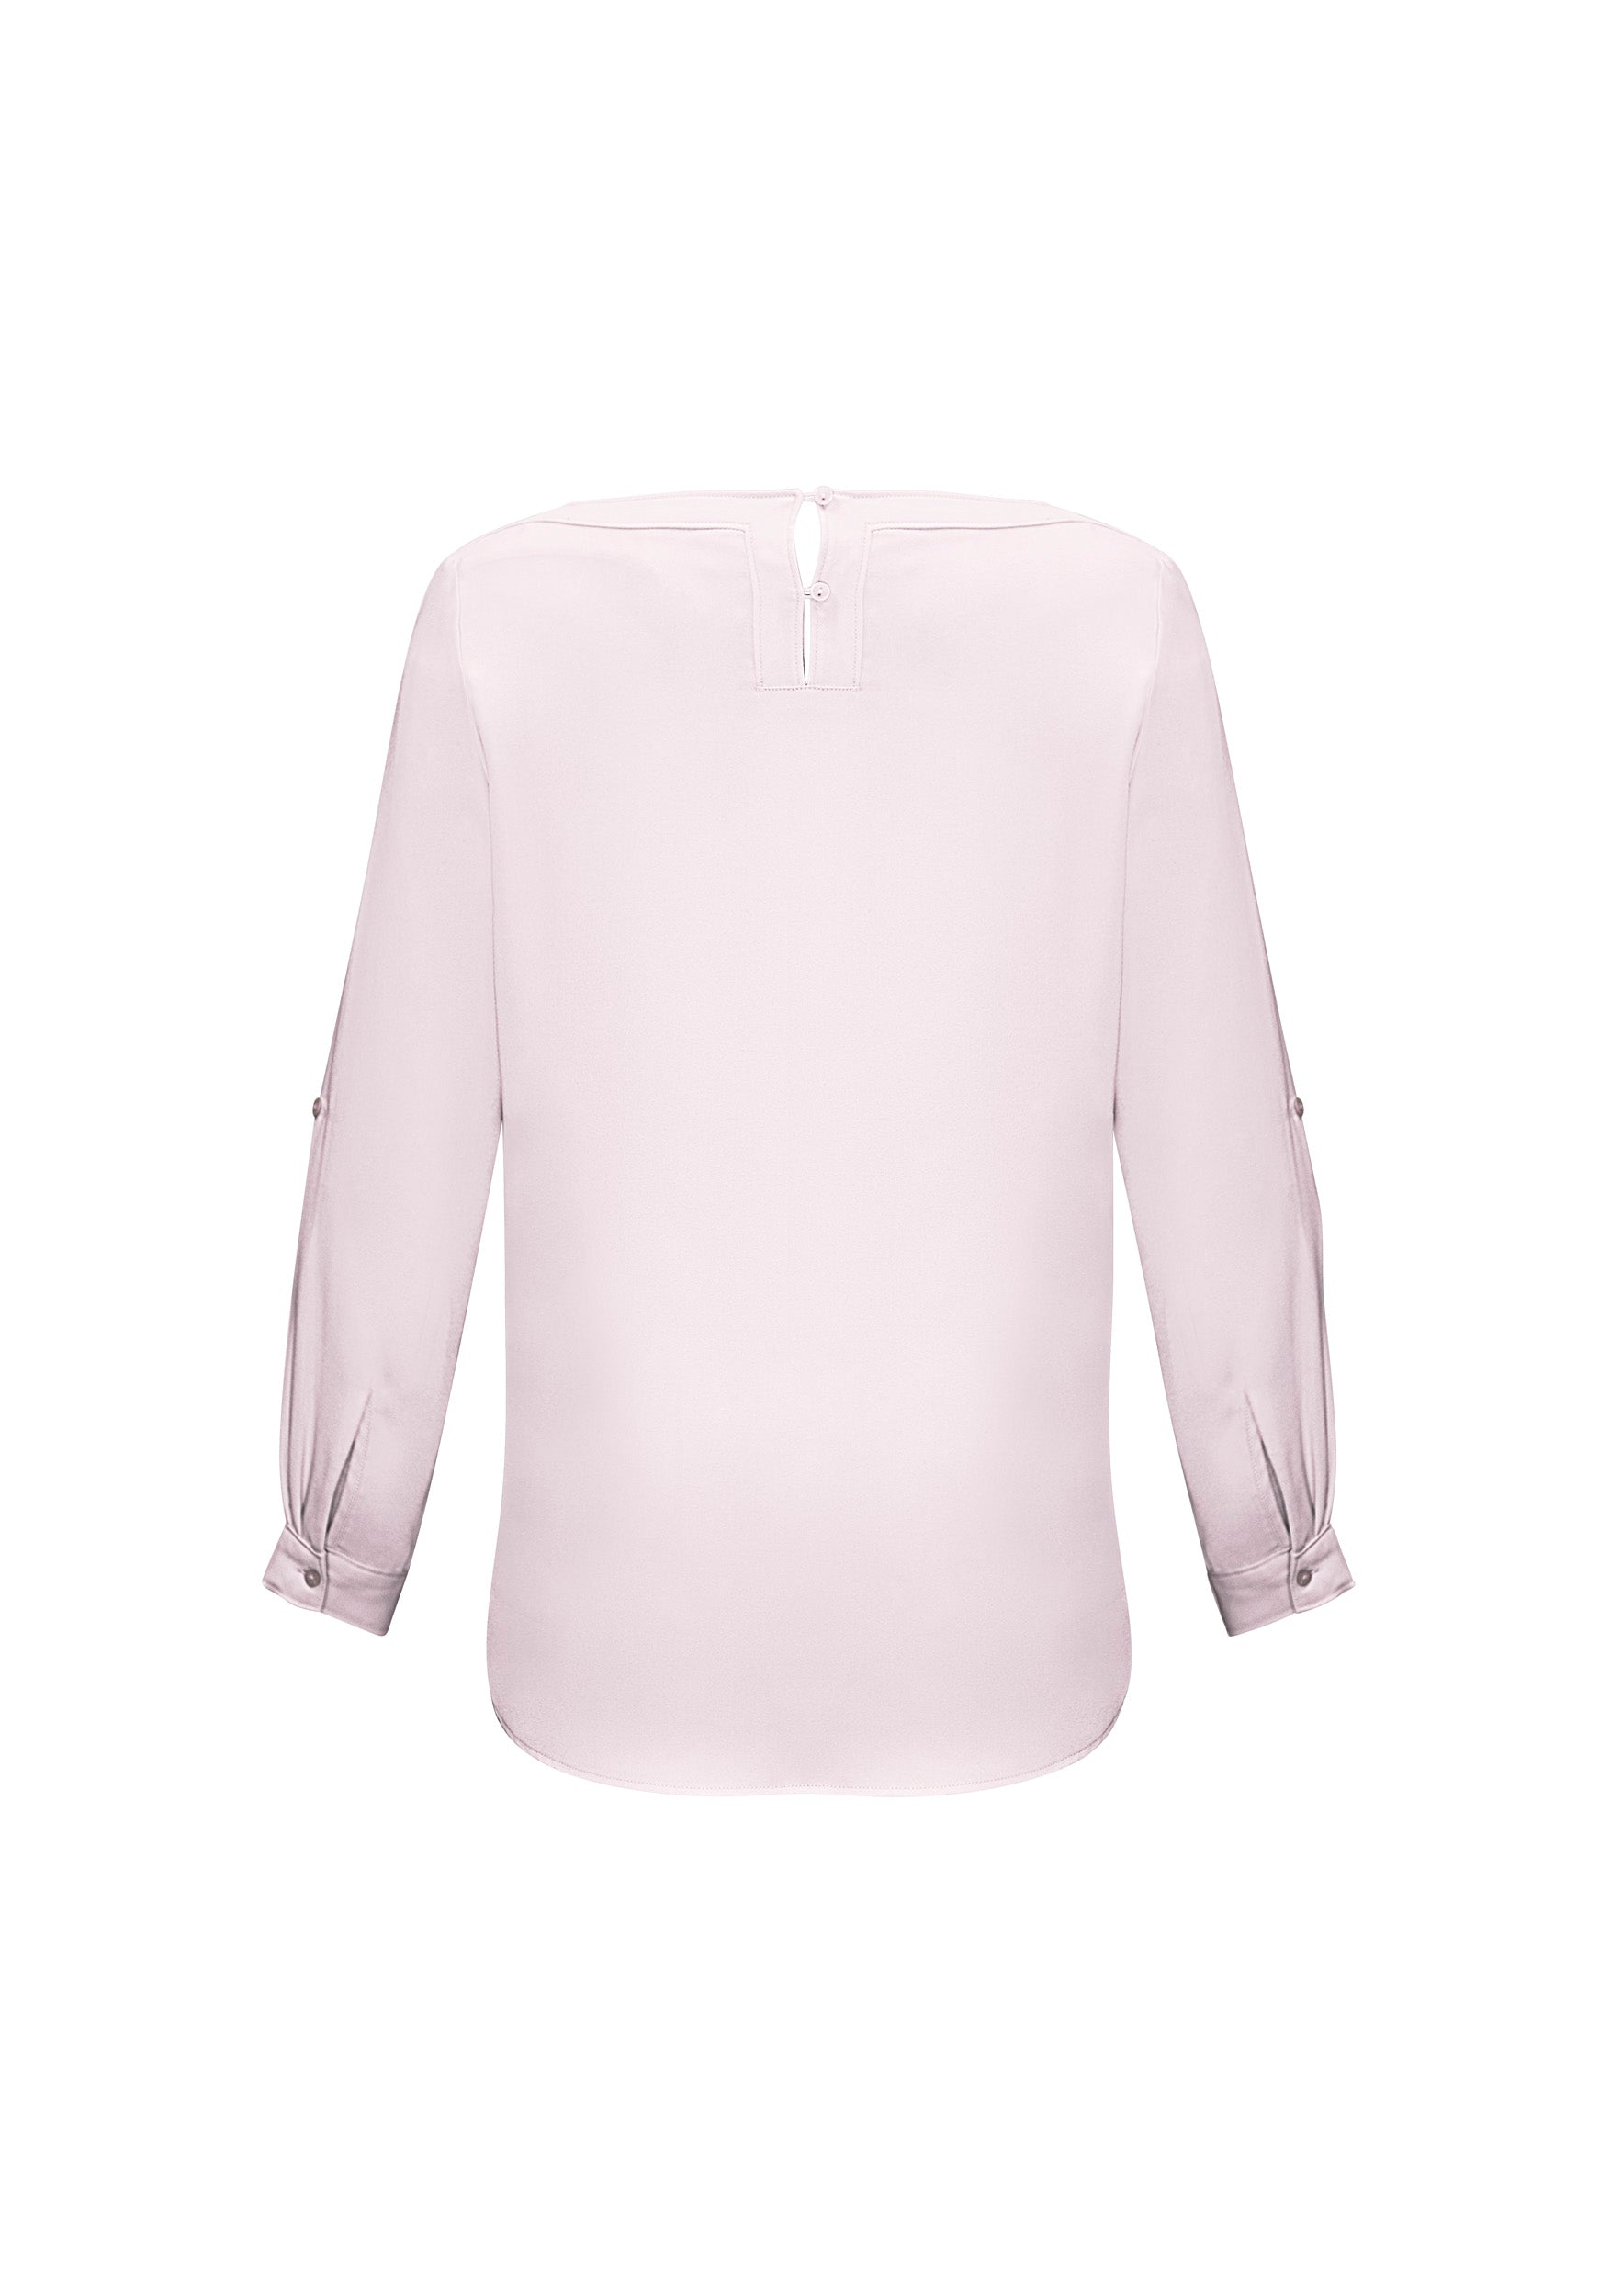 Womens Madison Boatneck Top